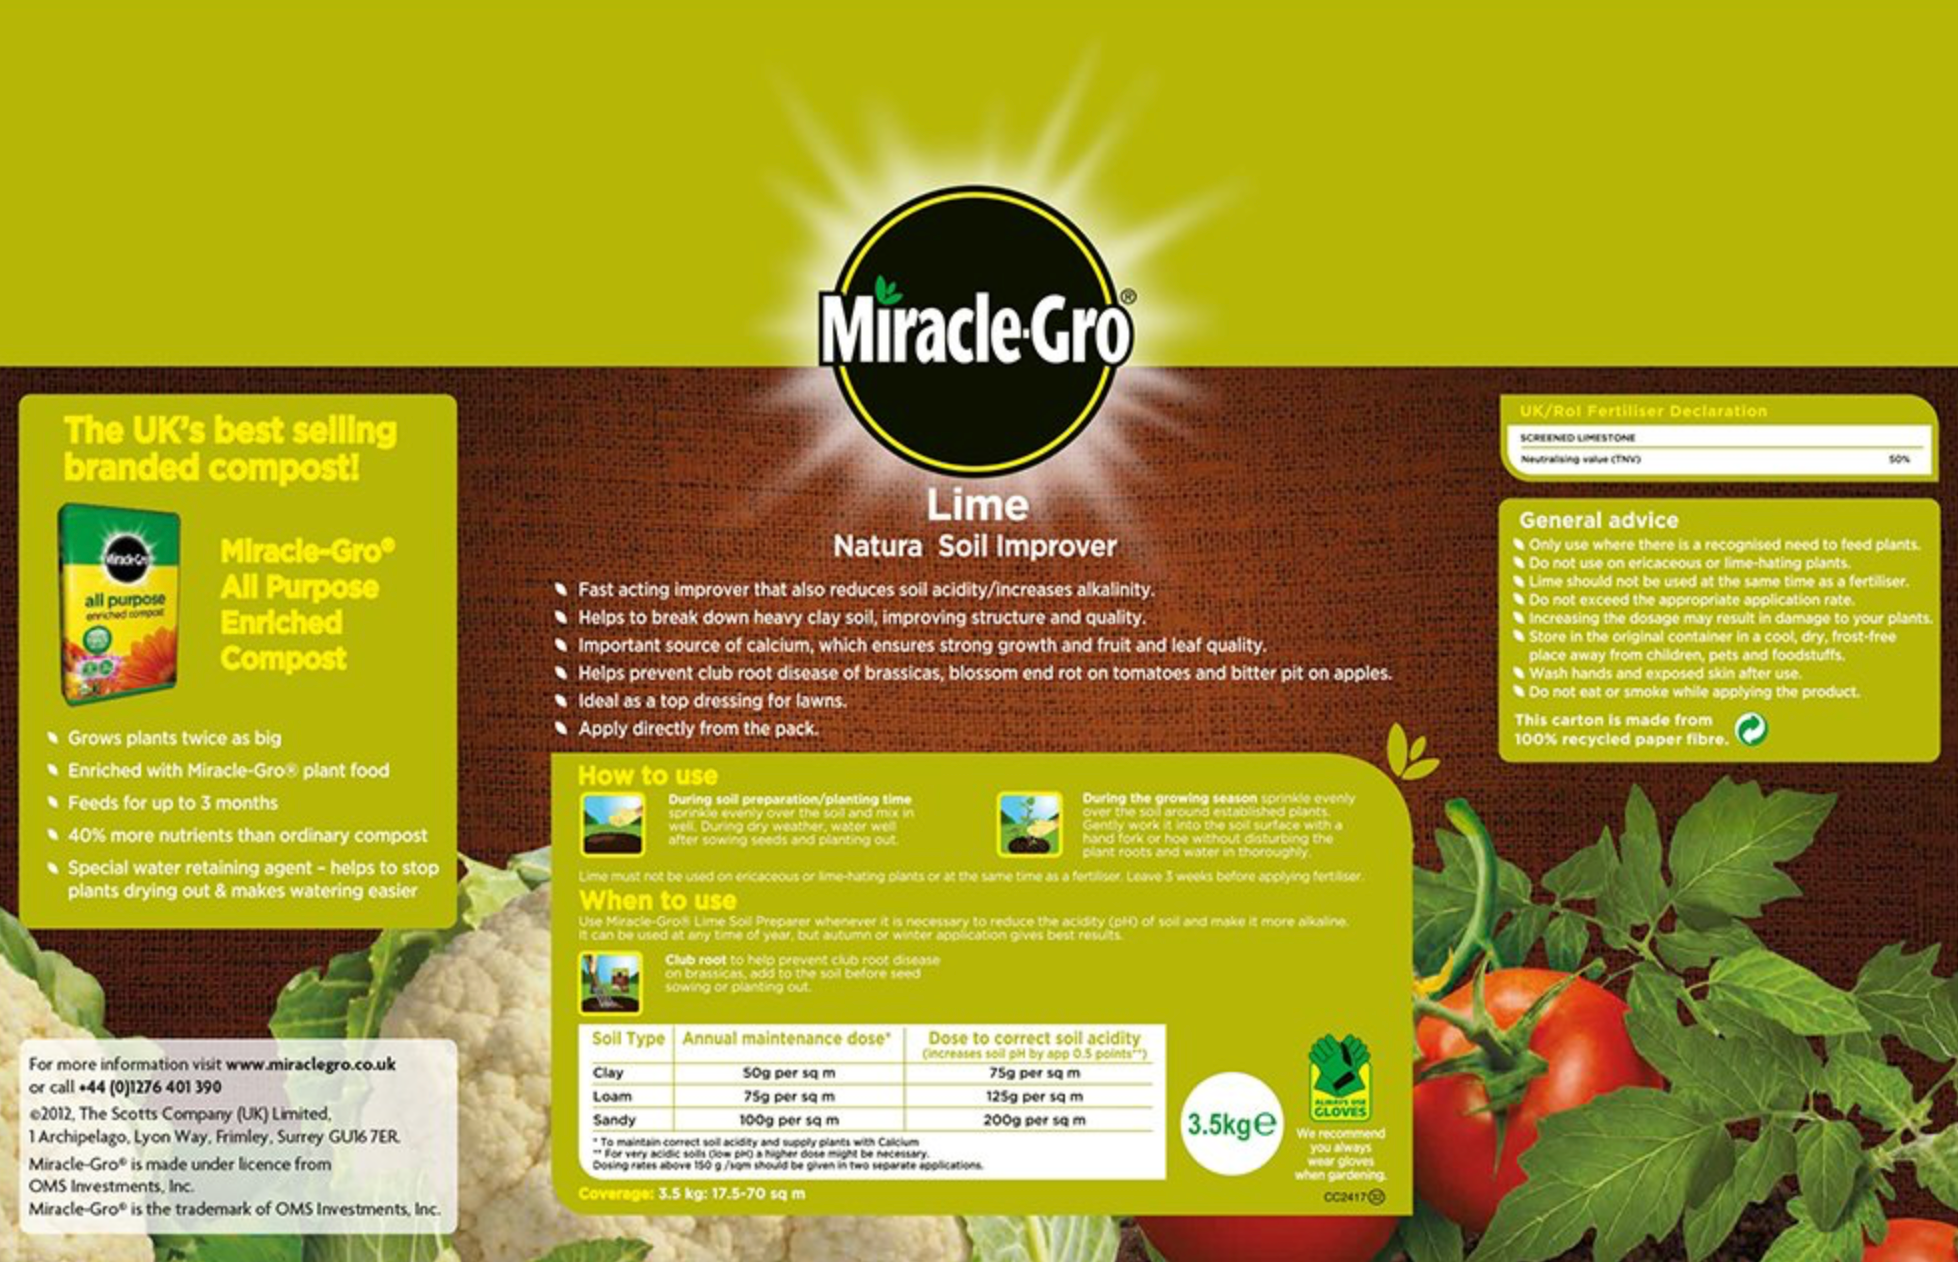 Miracle-Gro   Lime Natural Soil Improver 3.5kg